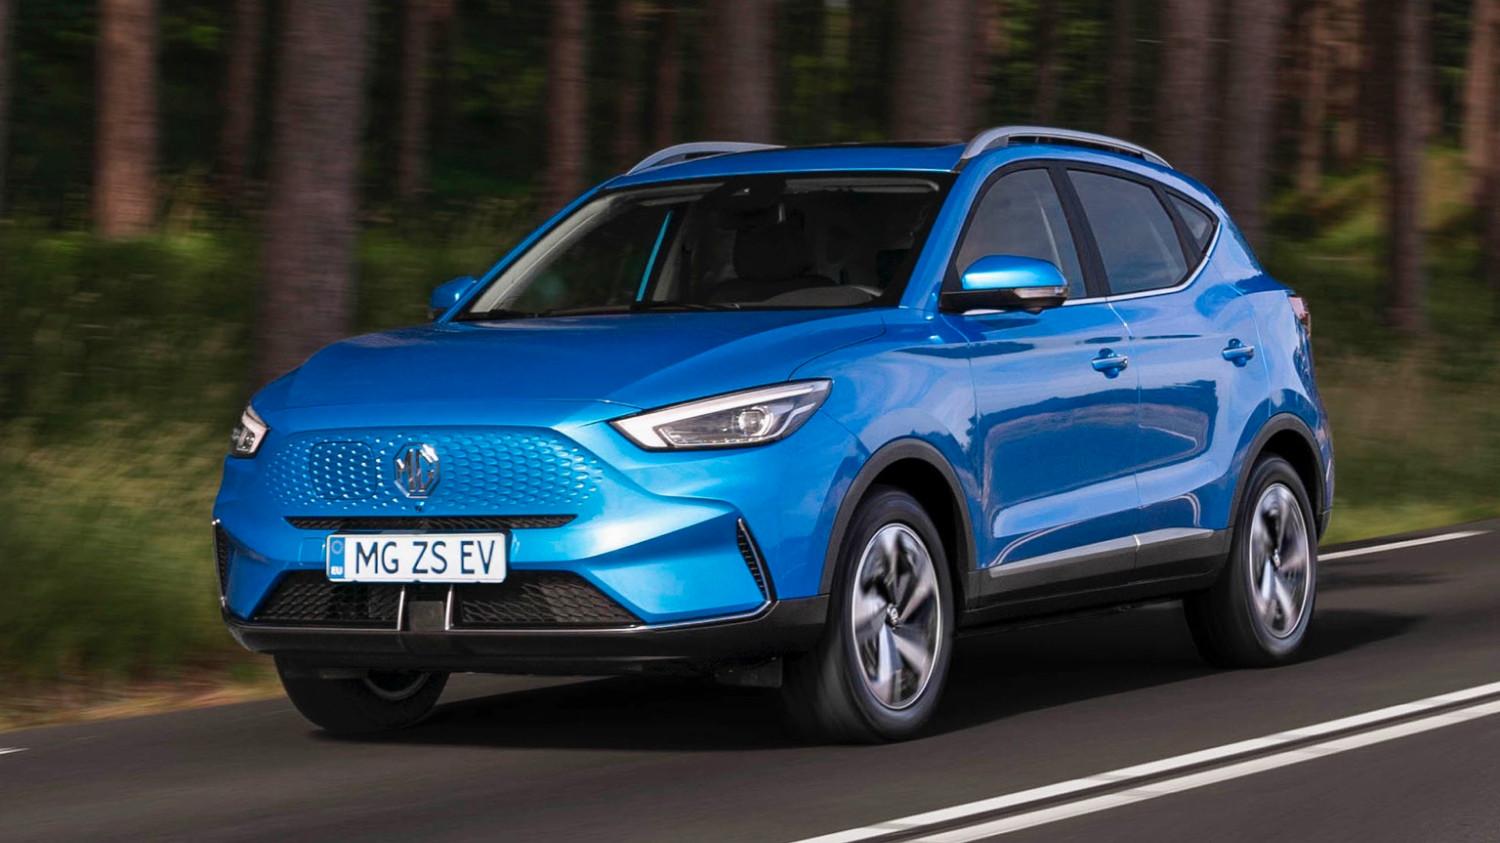 MG sets a new standard – and EV sportscar future coming